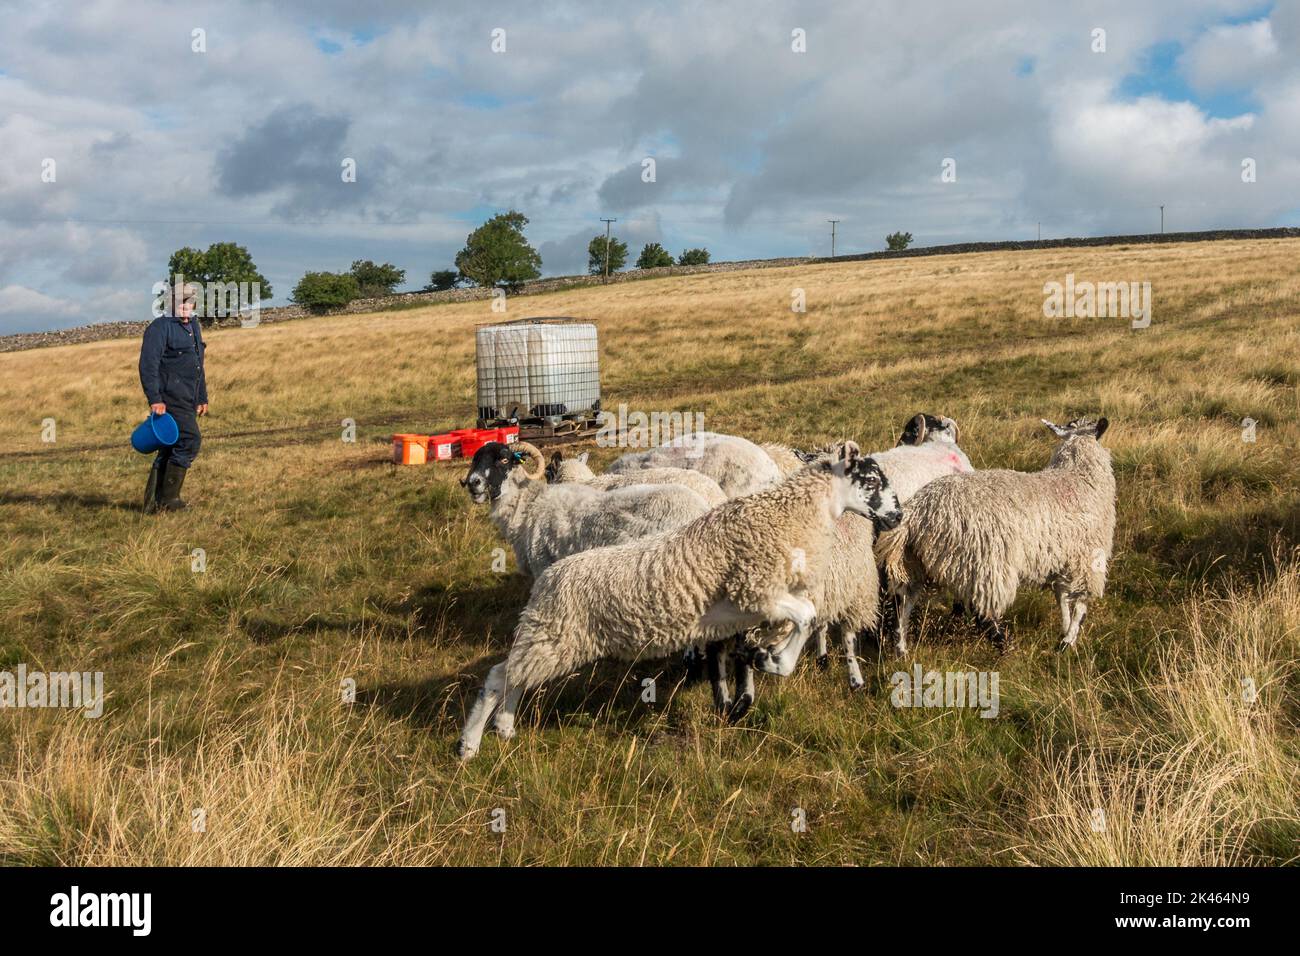 Farmer in a heatwave filling water buckets for the sheep with a smile, Yorkshire Dales National Park, England, UK Stock Photo